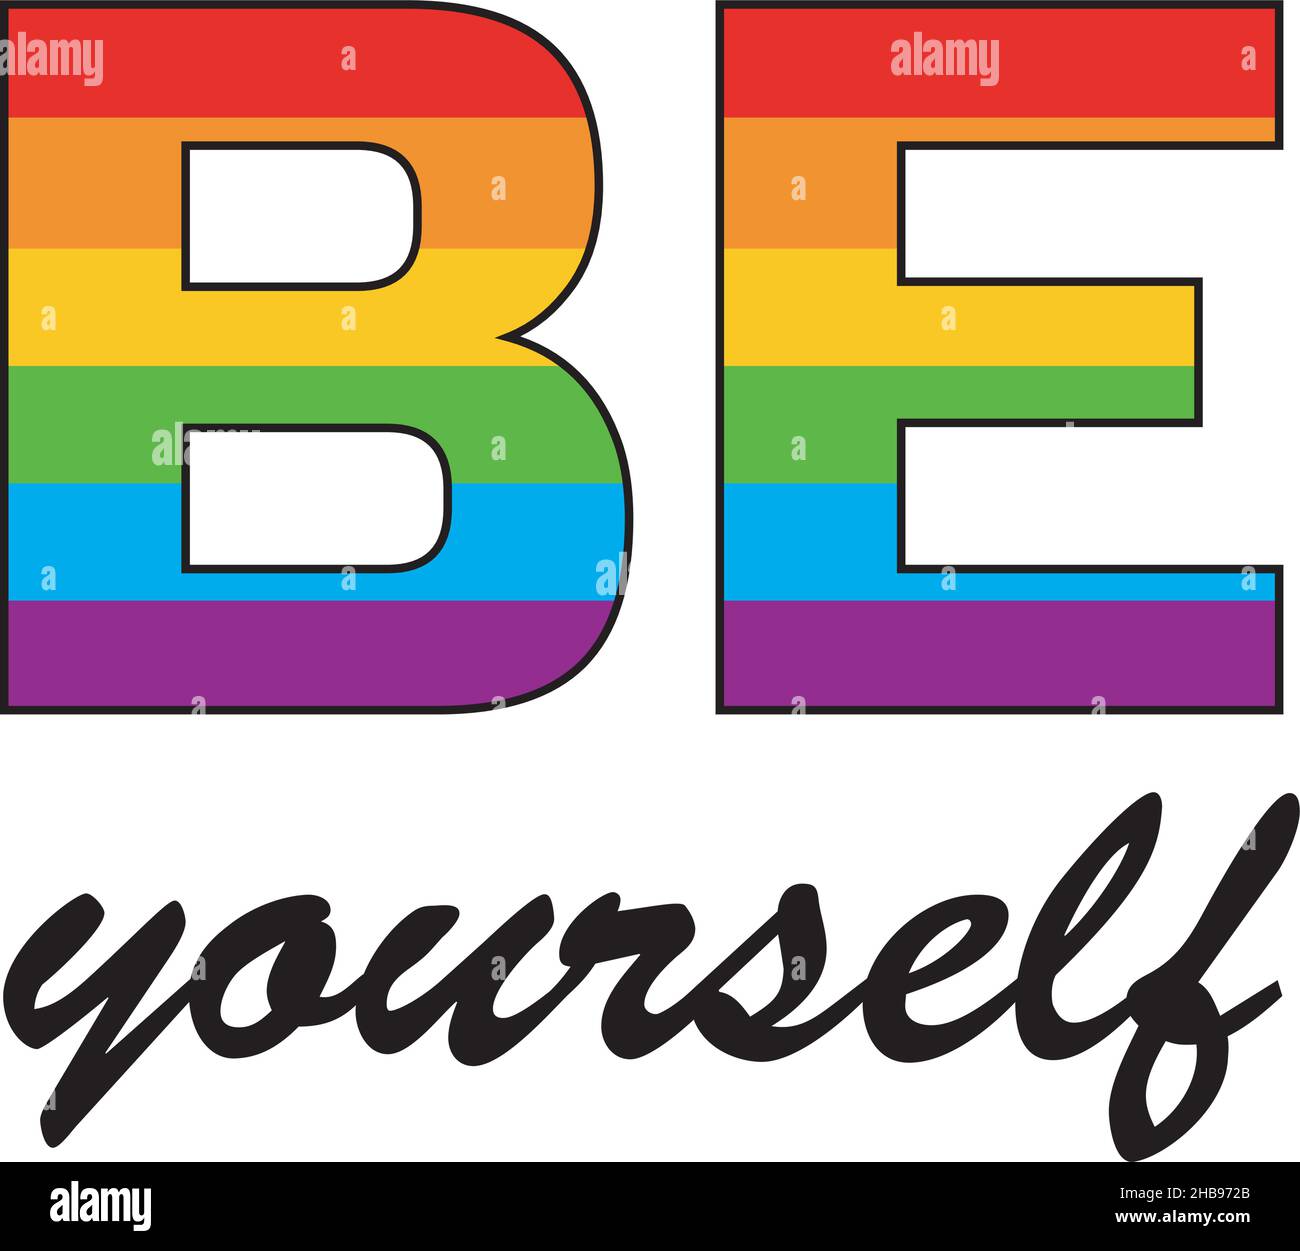 Be yourself quote. LGBT rainbow pride flag. Vector illustration isolated on white Stock Vector